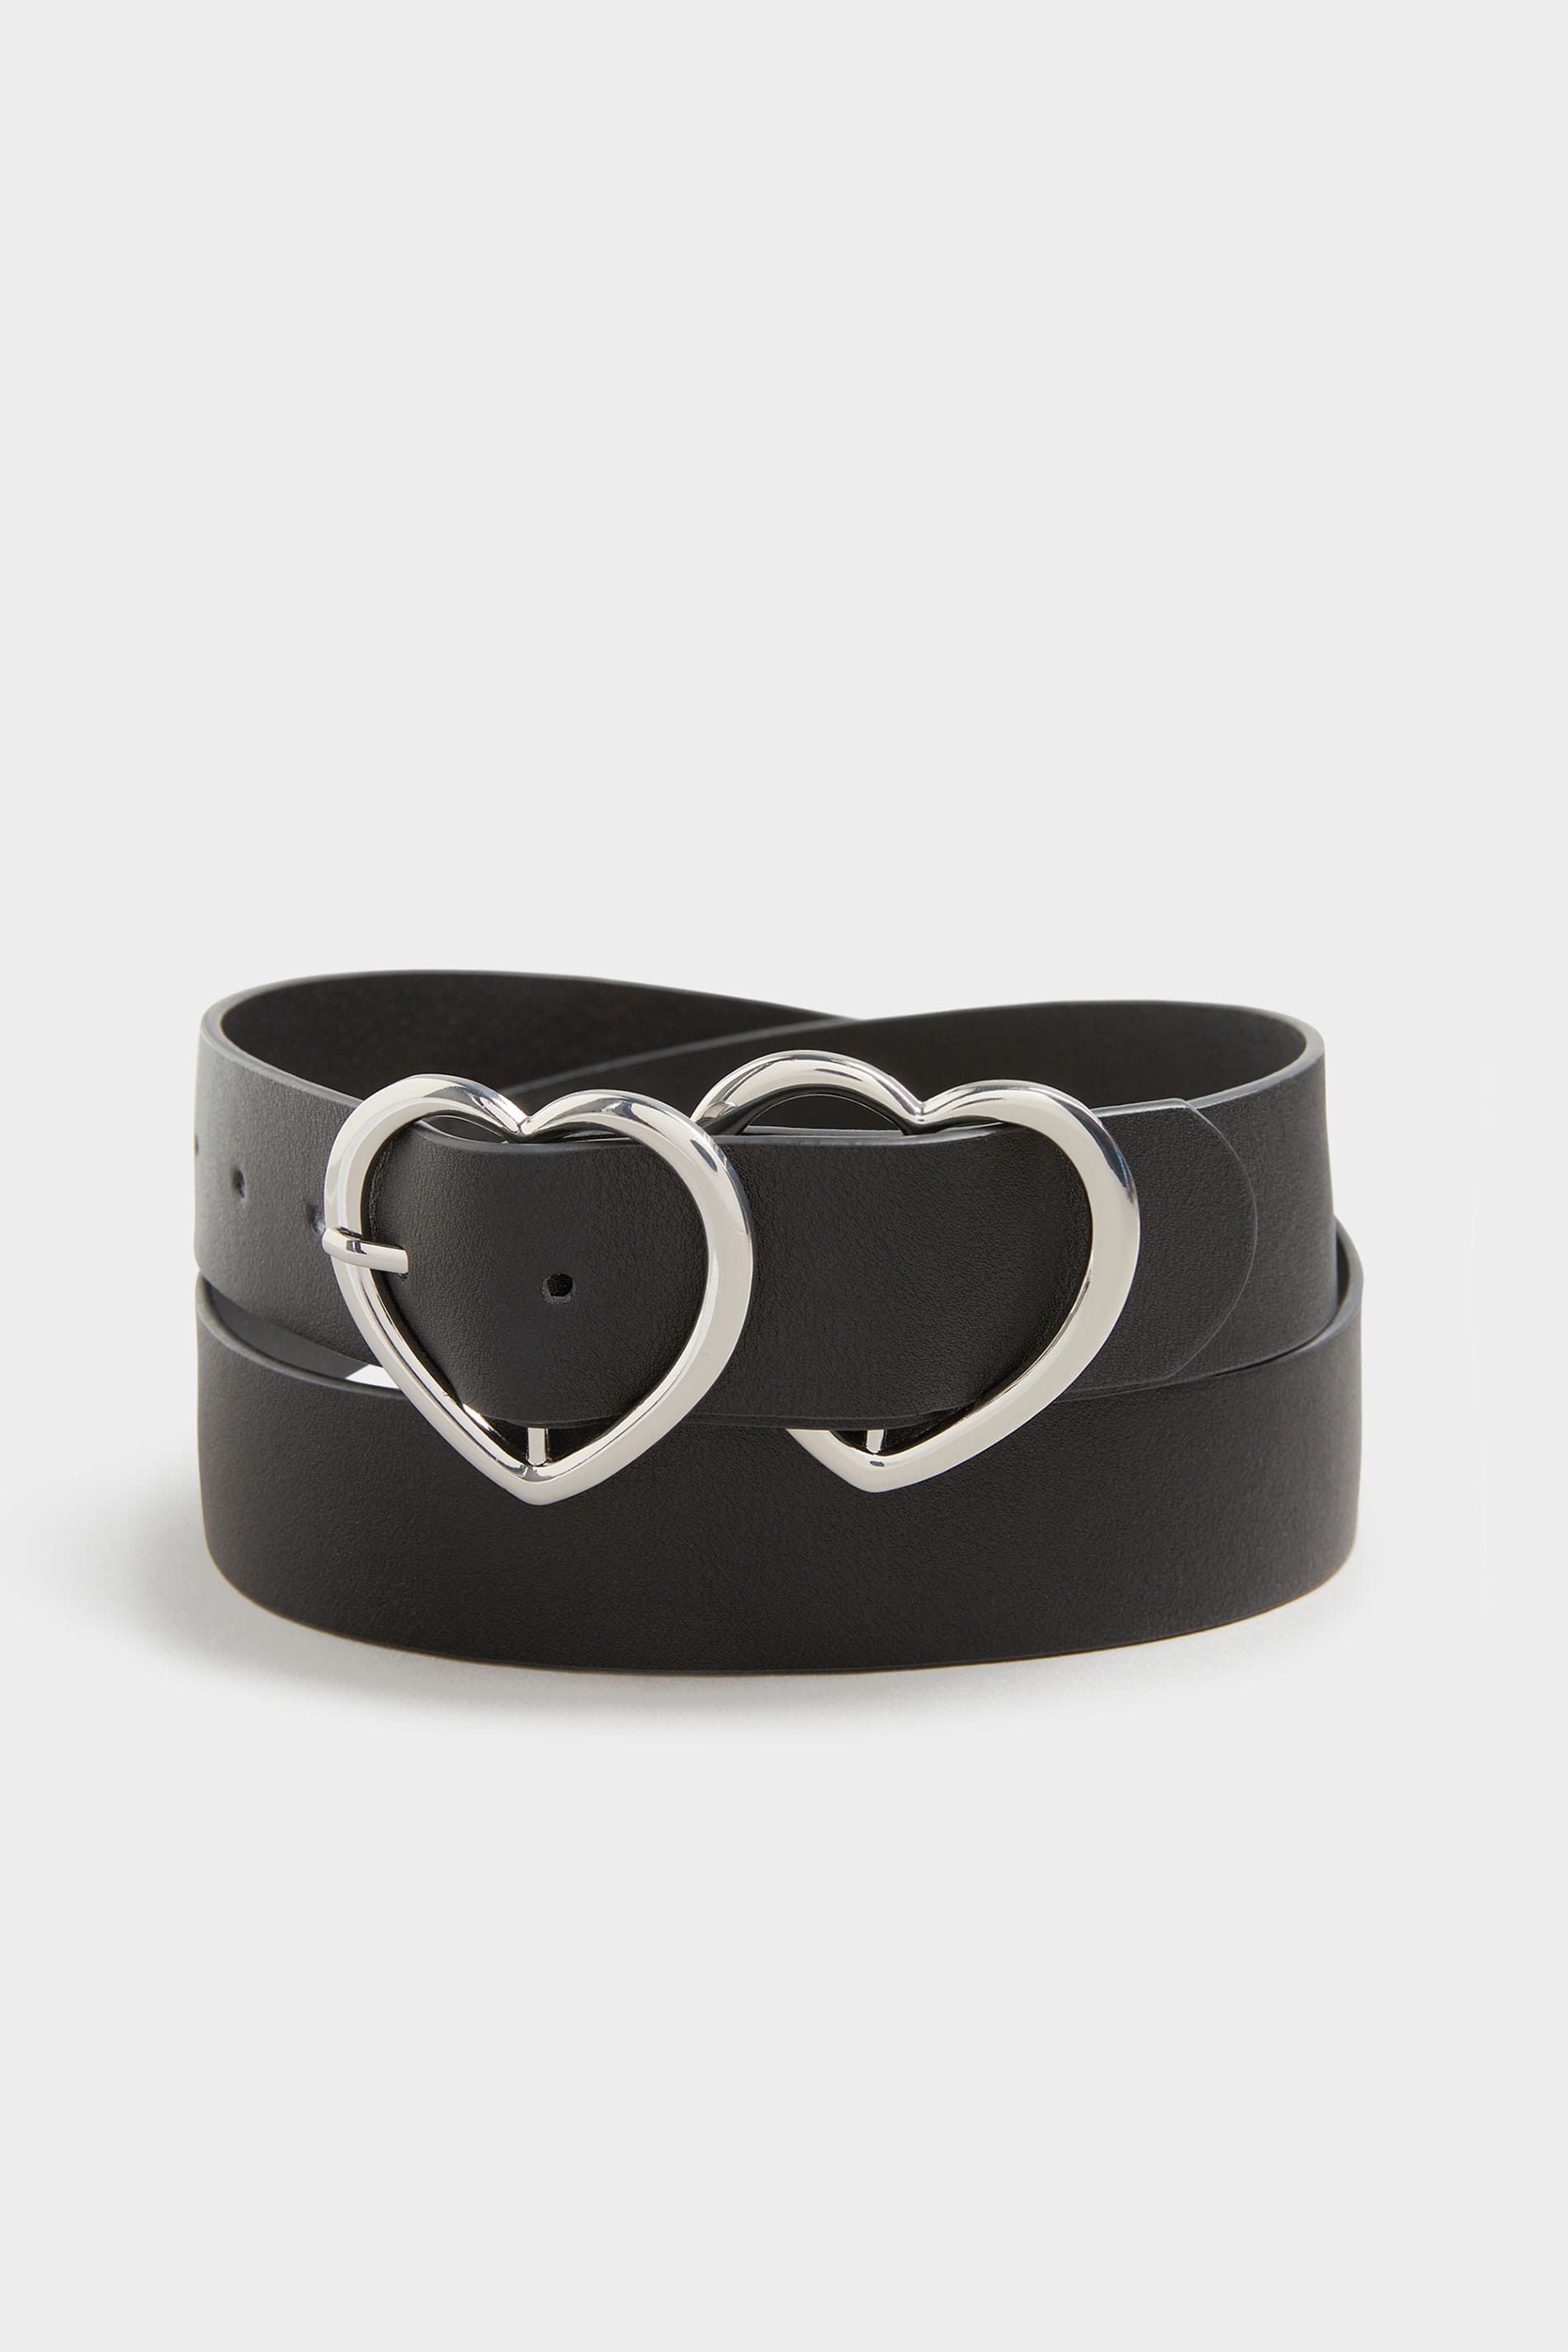 Black & Silver Double Heart Belt | Yours Clothing 2